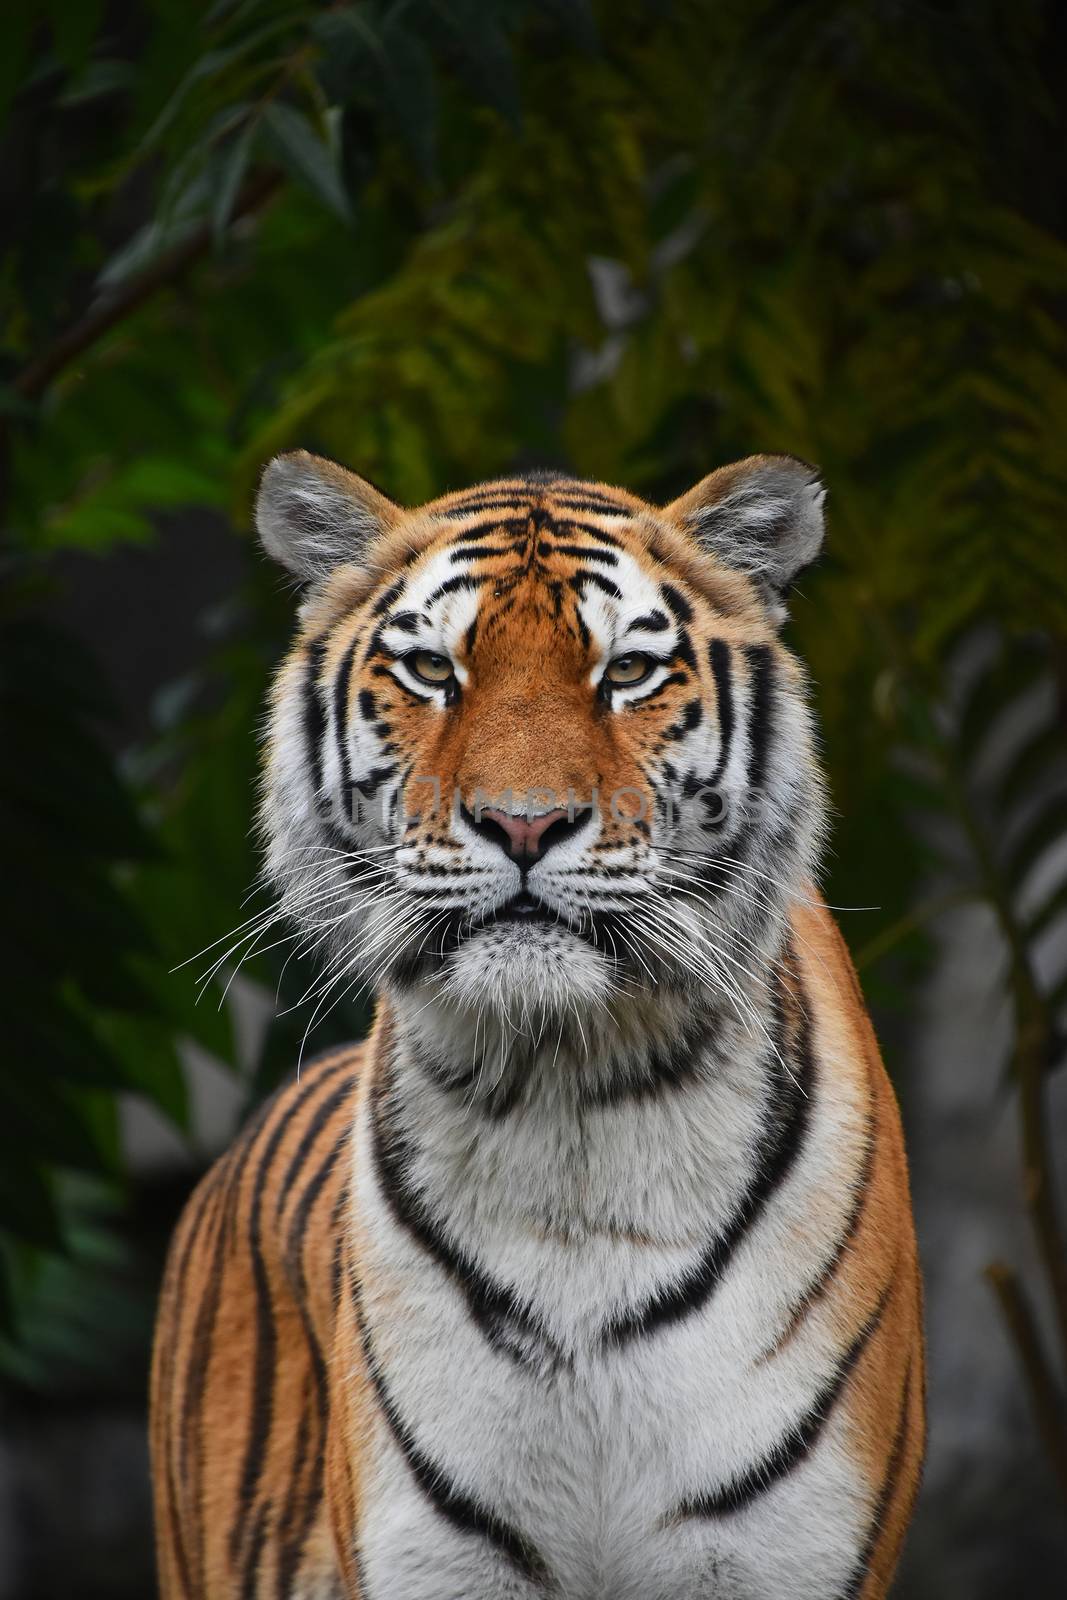 Close up portrait of one young Siberian tiger (Amur tiger, Panthera tigris altaica) looking at camera, low angle view